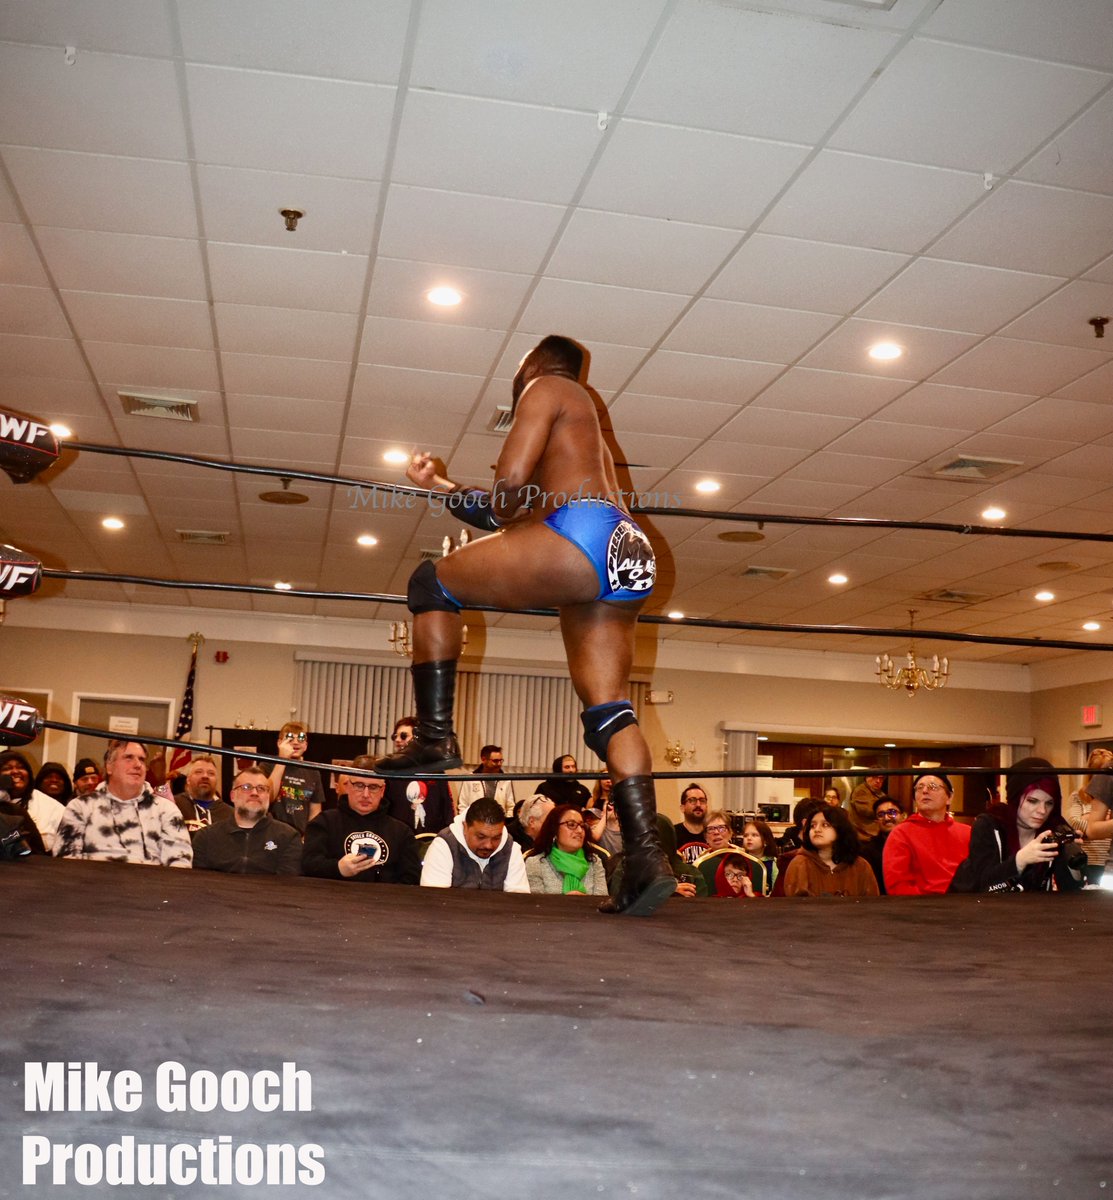 Crowd Pleaser by #MikeGoochProductions 

#photography #nycphotographer #FollowThisPhotoGuy #wrestling #indyWrestling #ringsidephotography #SHARETHISPOST #NewJersey #SSW #WWERaw #NXT #Smackdown #WrestleMania

@SWFLive